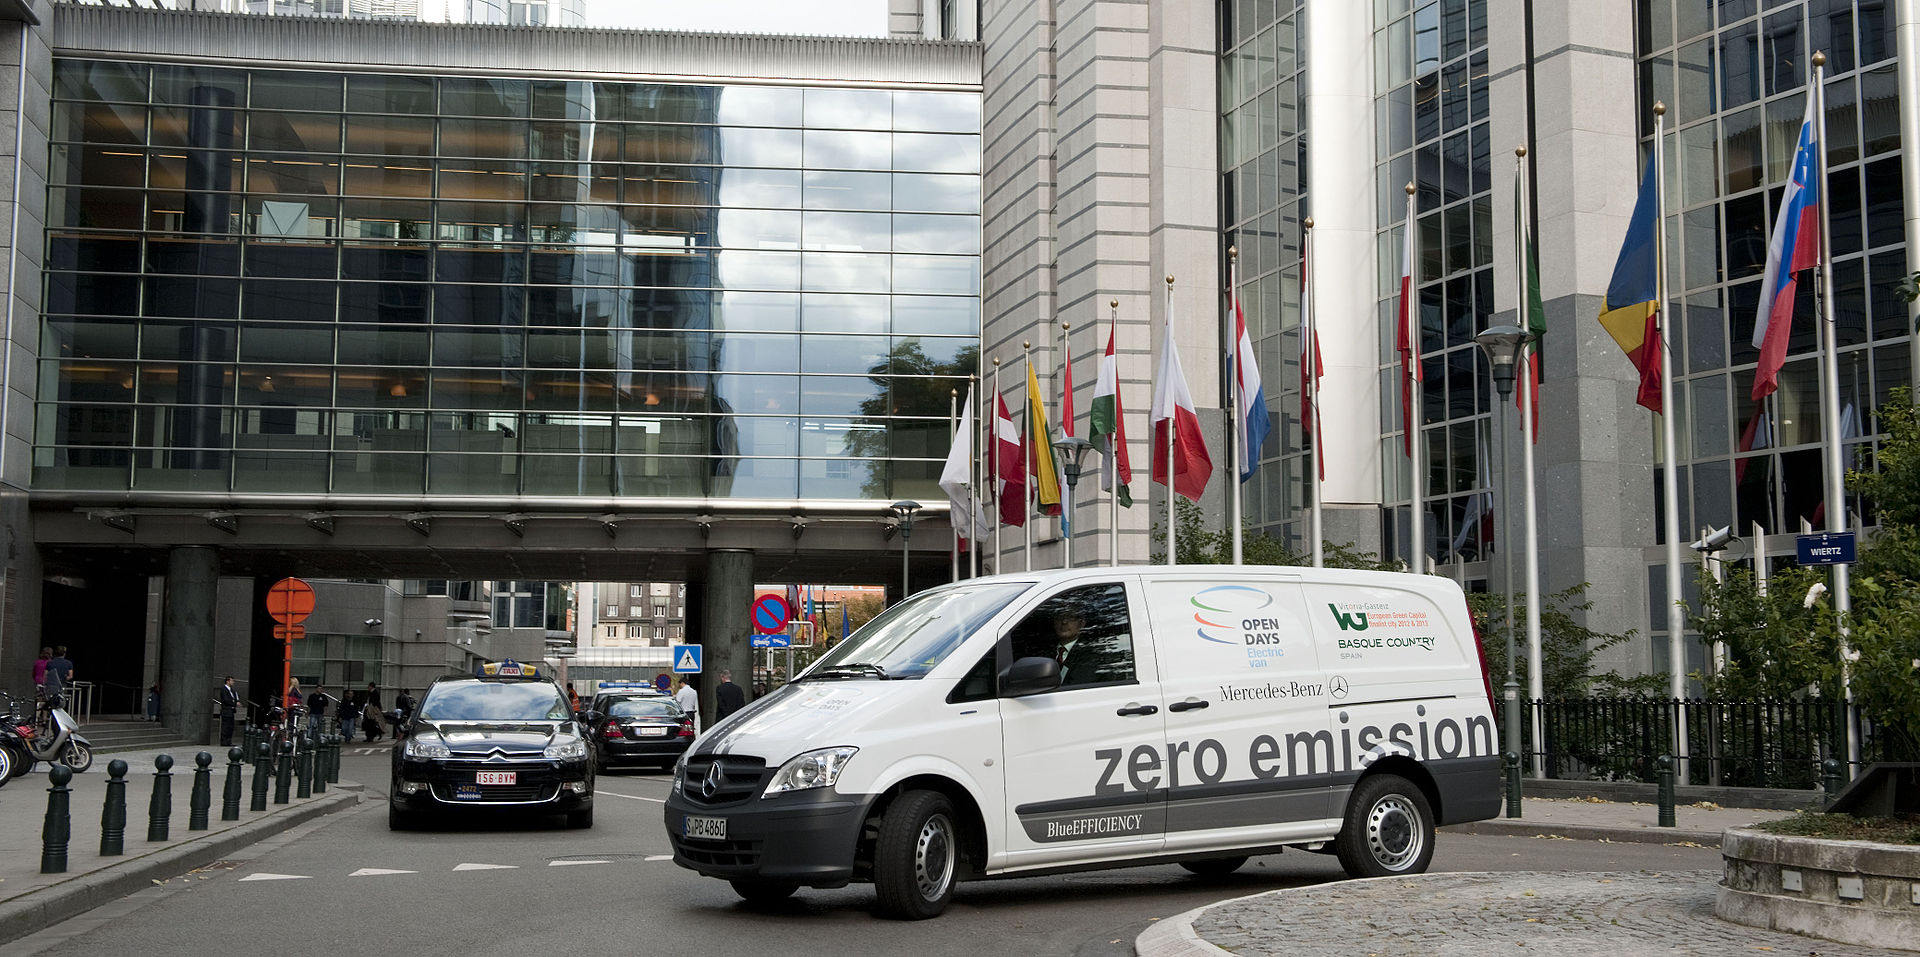 Fuel economy and commercial vehicles: the new Mercedes Vito Van